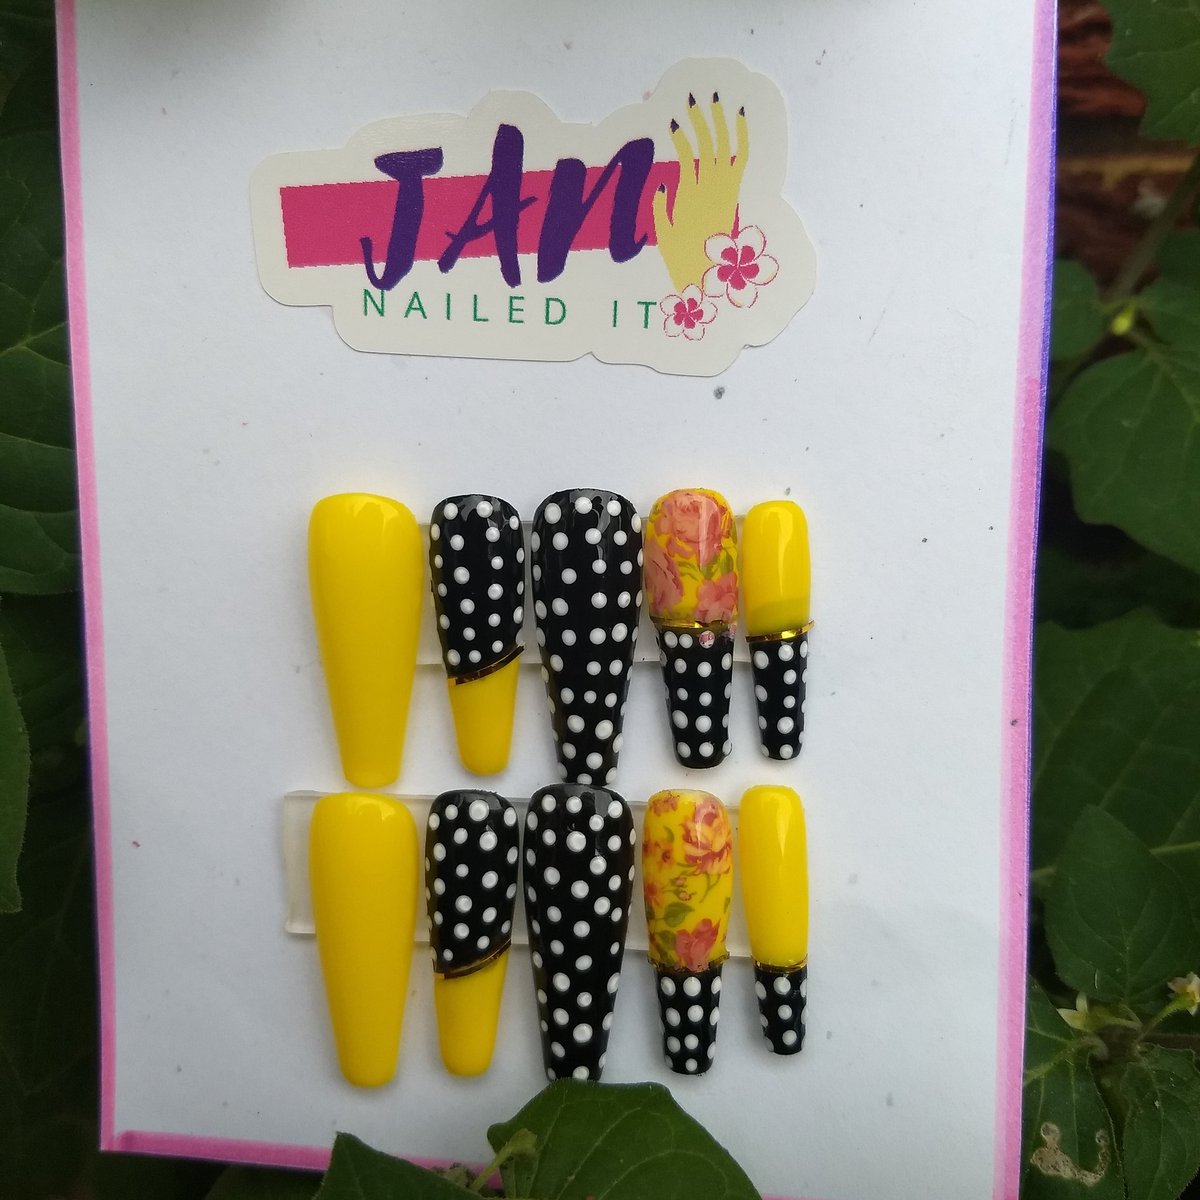 Black N Yellow set now available. Click the link in BIO to purchase
 #pressonsnails #pressonnailbusiness #pressonnailsset #pressonnailsets #pressonsets #pressonails #pressonnailsofinstagram #pressonlife #pressonmanicure #pressonnailsqueen #pressonset #pressonnailslovers #pressons